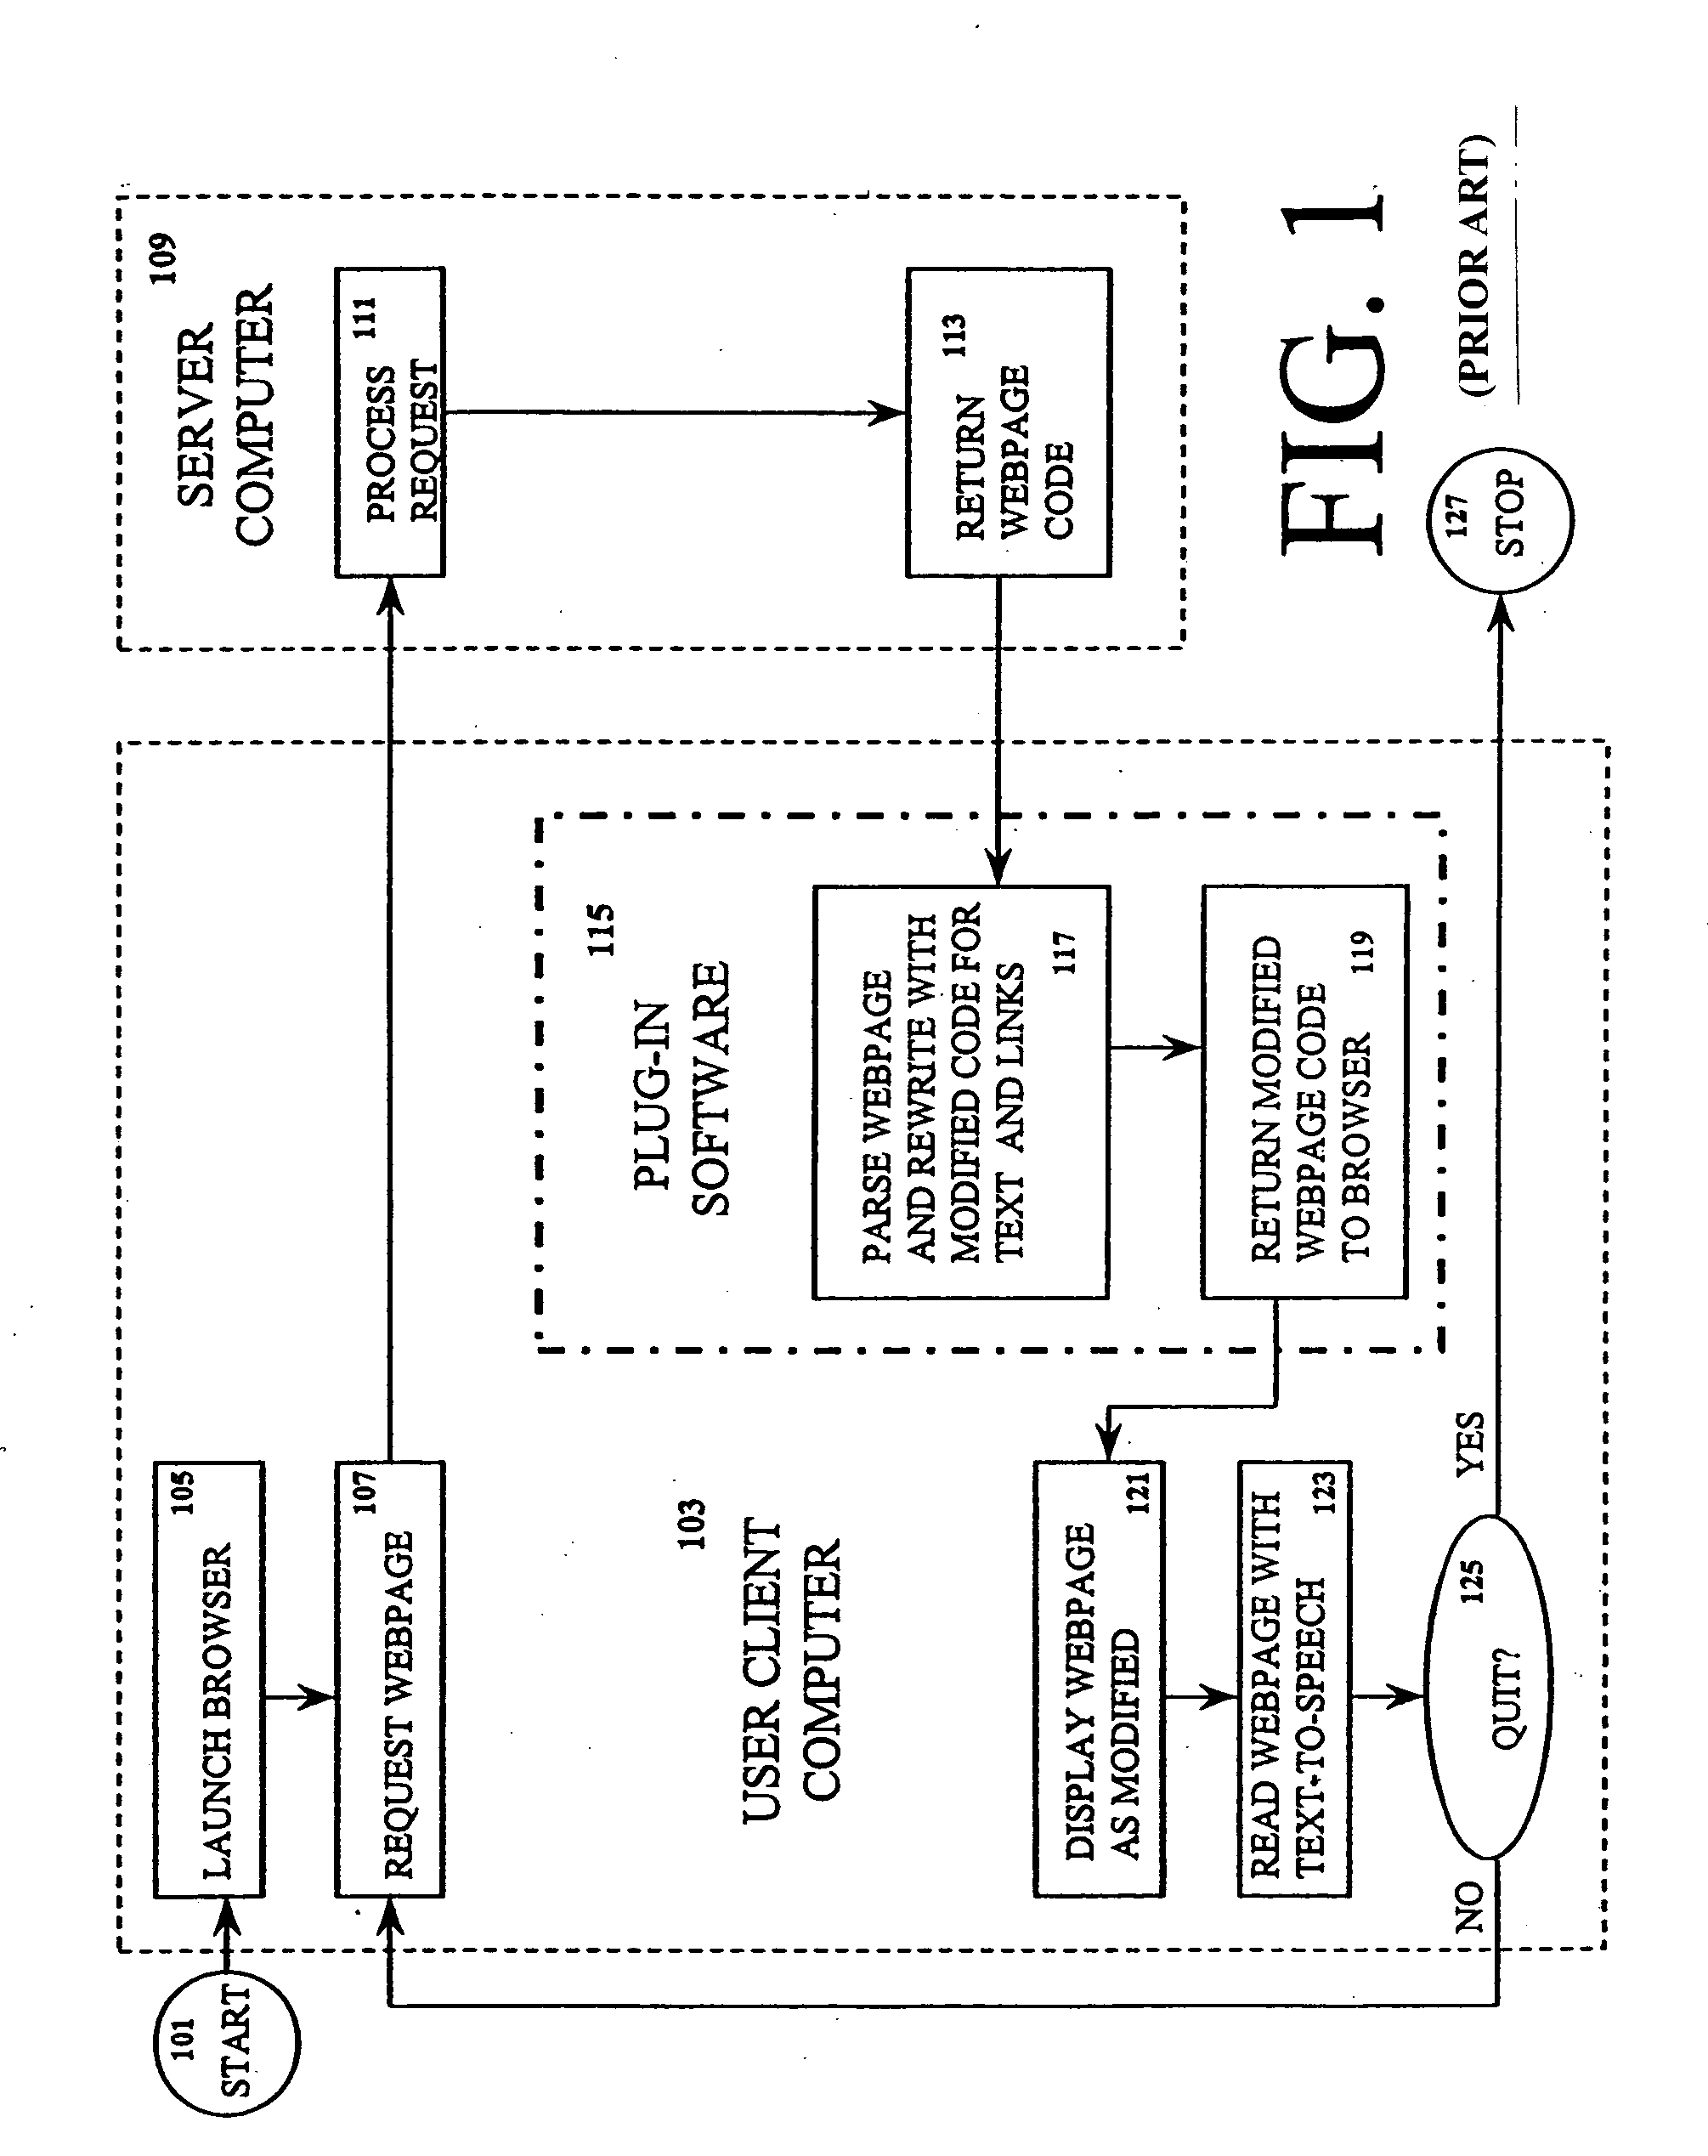 Method and apparatus for interacting with a visually displayed document on a screen reader